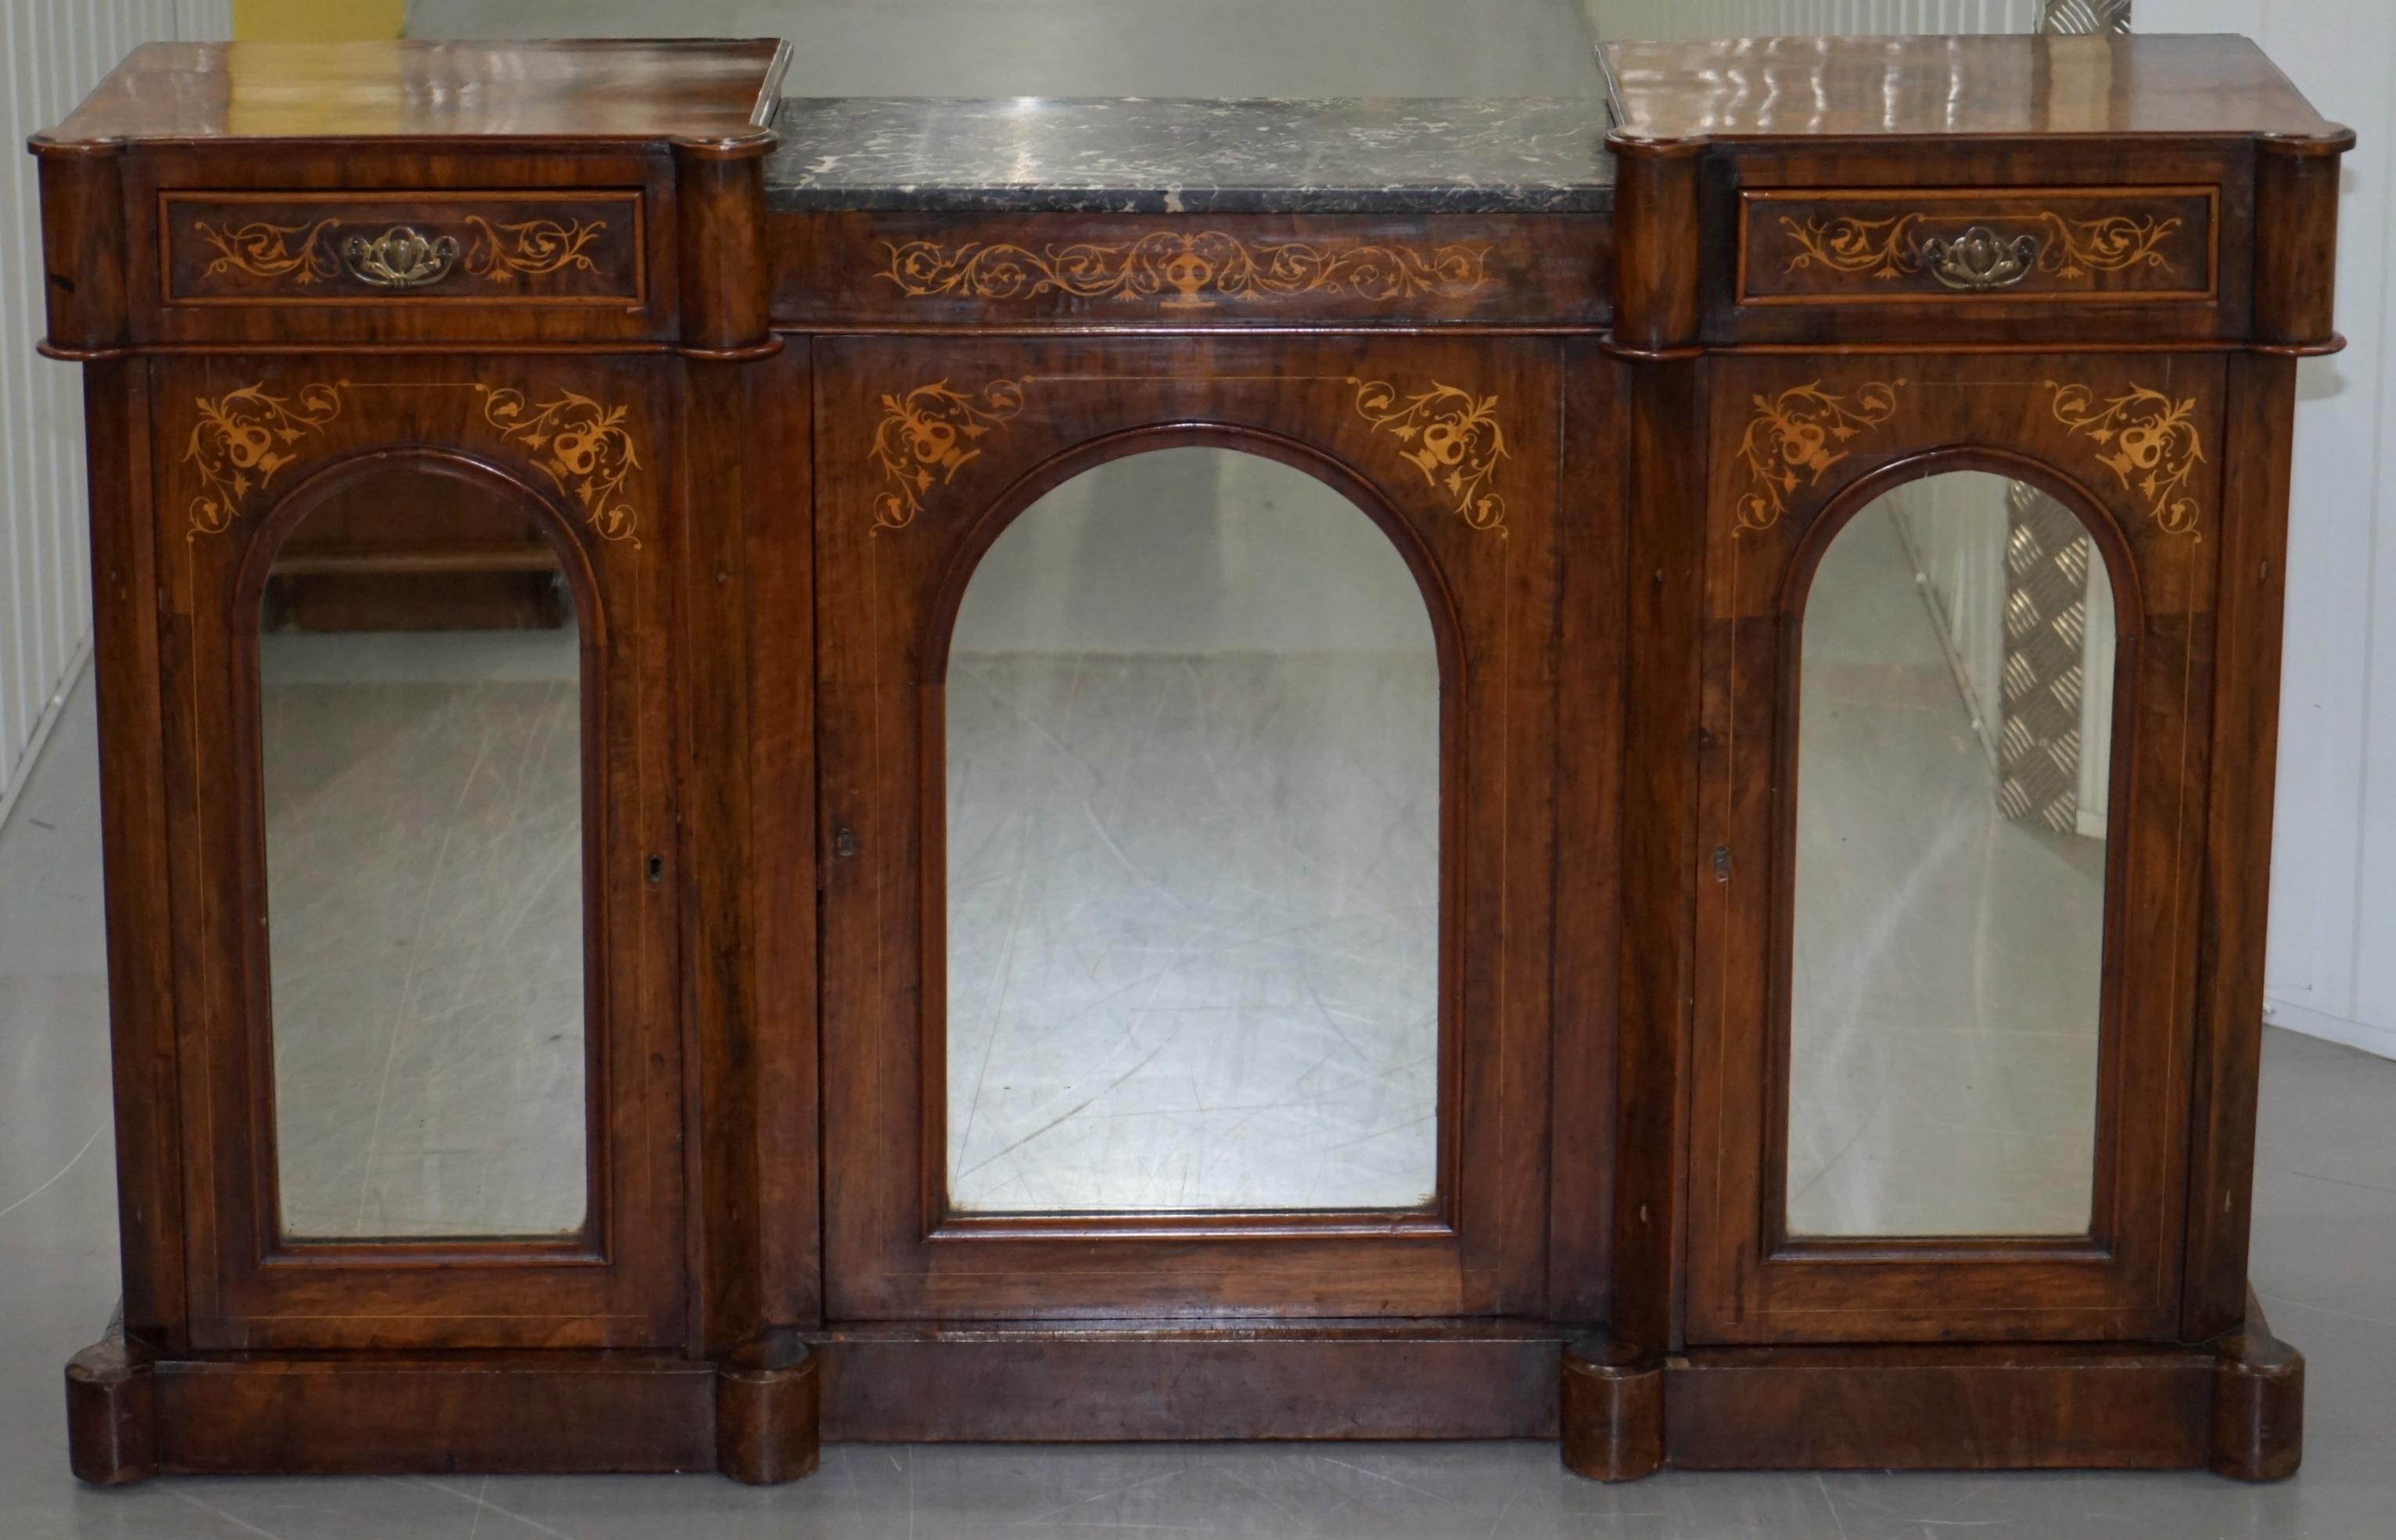 We are delighted to this lovely Victorian walnut with marquetry inlaid credenza with marble top and mirrored doors

This piece is very decorative and sculptural, the timber patina is glorious, its quarter cut walnut and has a lovely warm glow to